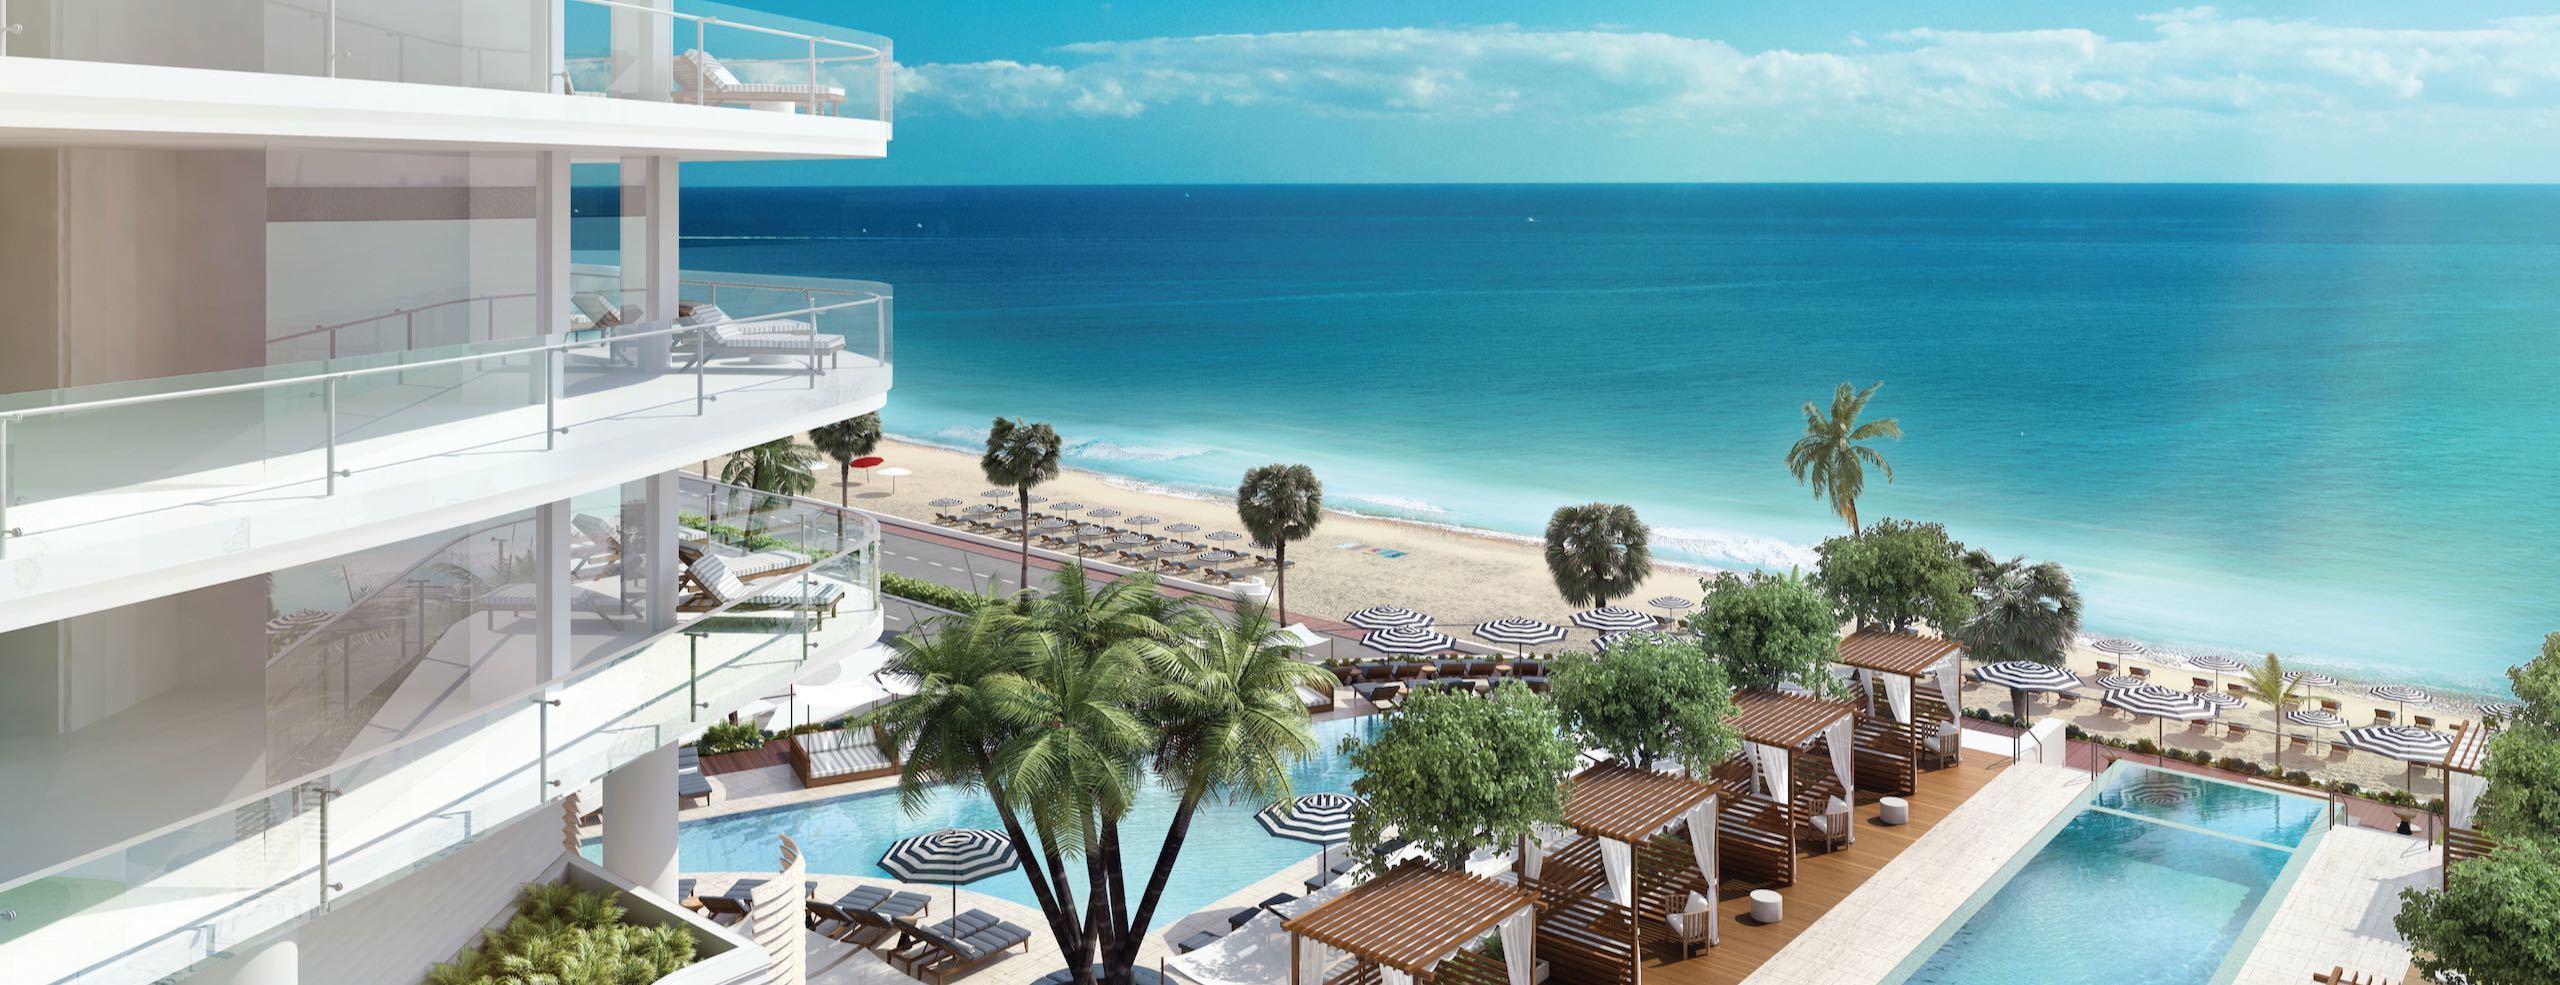 Fort Lauderdale Beachfront Condos for Sale